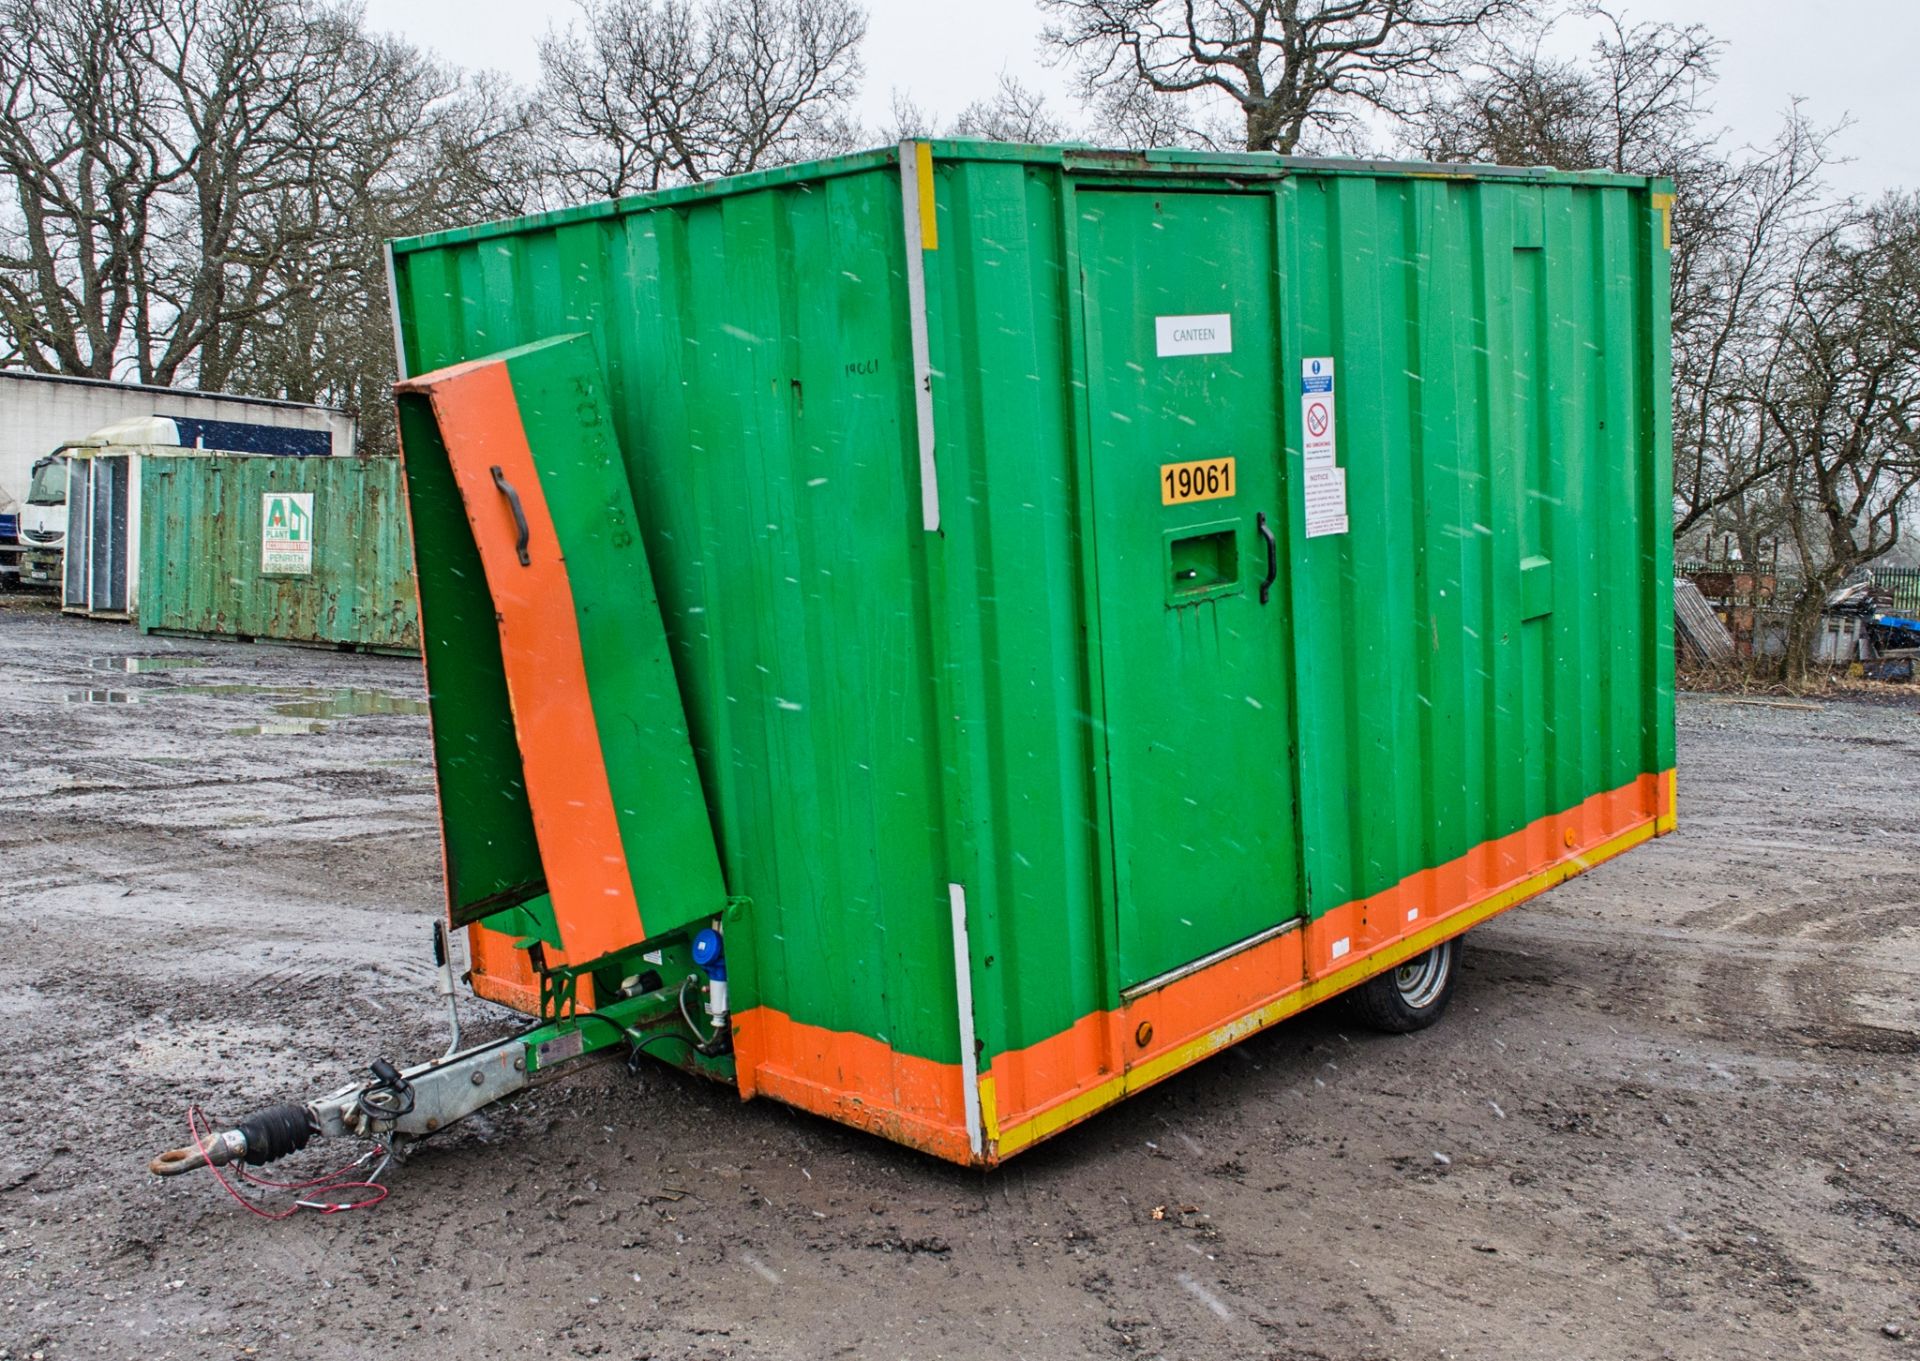 12 ft x 8 ft steel anti vandal mobile welfare unit Comprising of: canteen area, toilet & generator